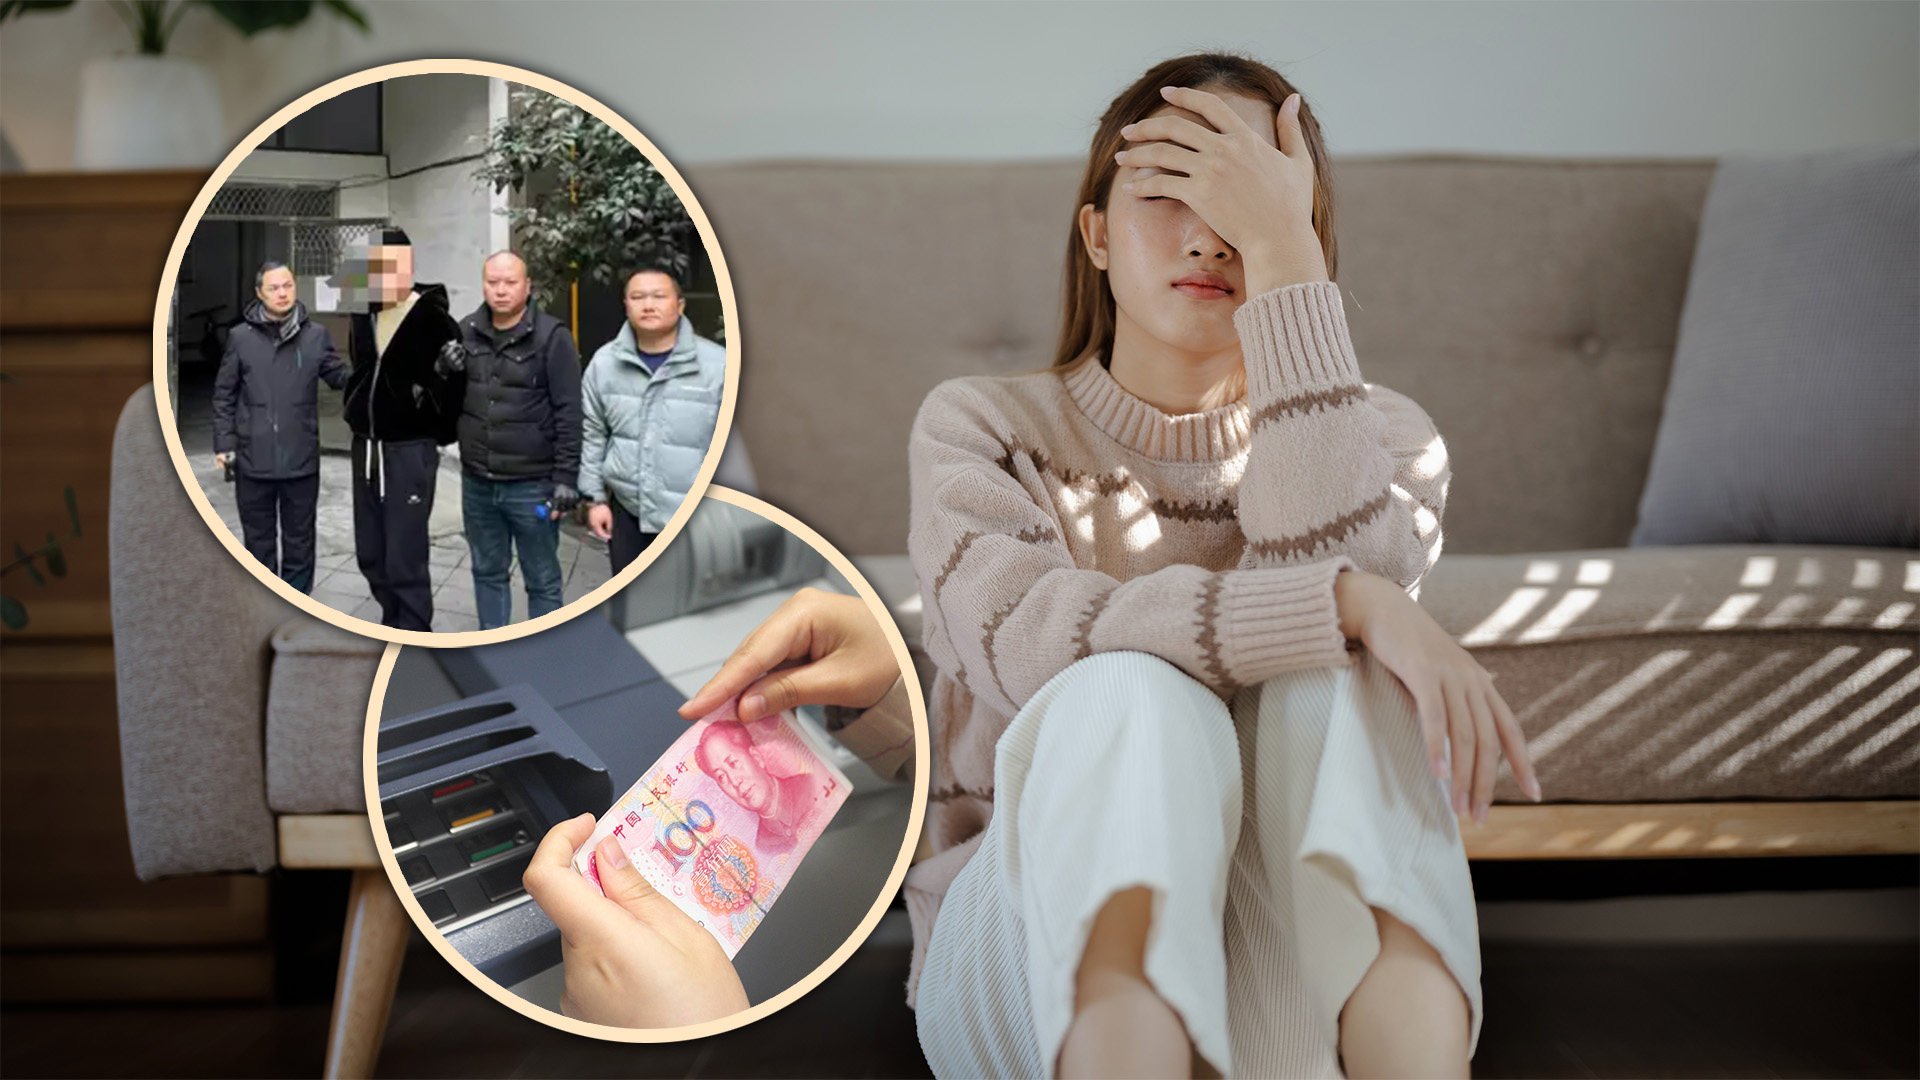 A besotted woman in China was so blinded by love that she paid off all her deceitful boyfriend’s debts and a ransom demand for him in a fake kidnap scam. Photo: SCMP composite/Shutterstock/Baidu